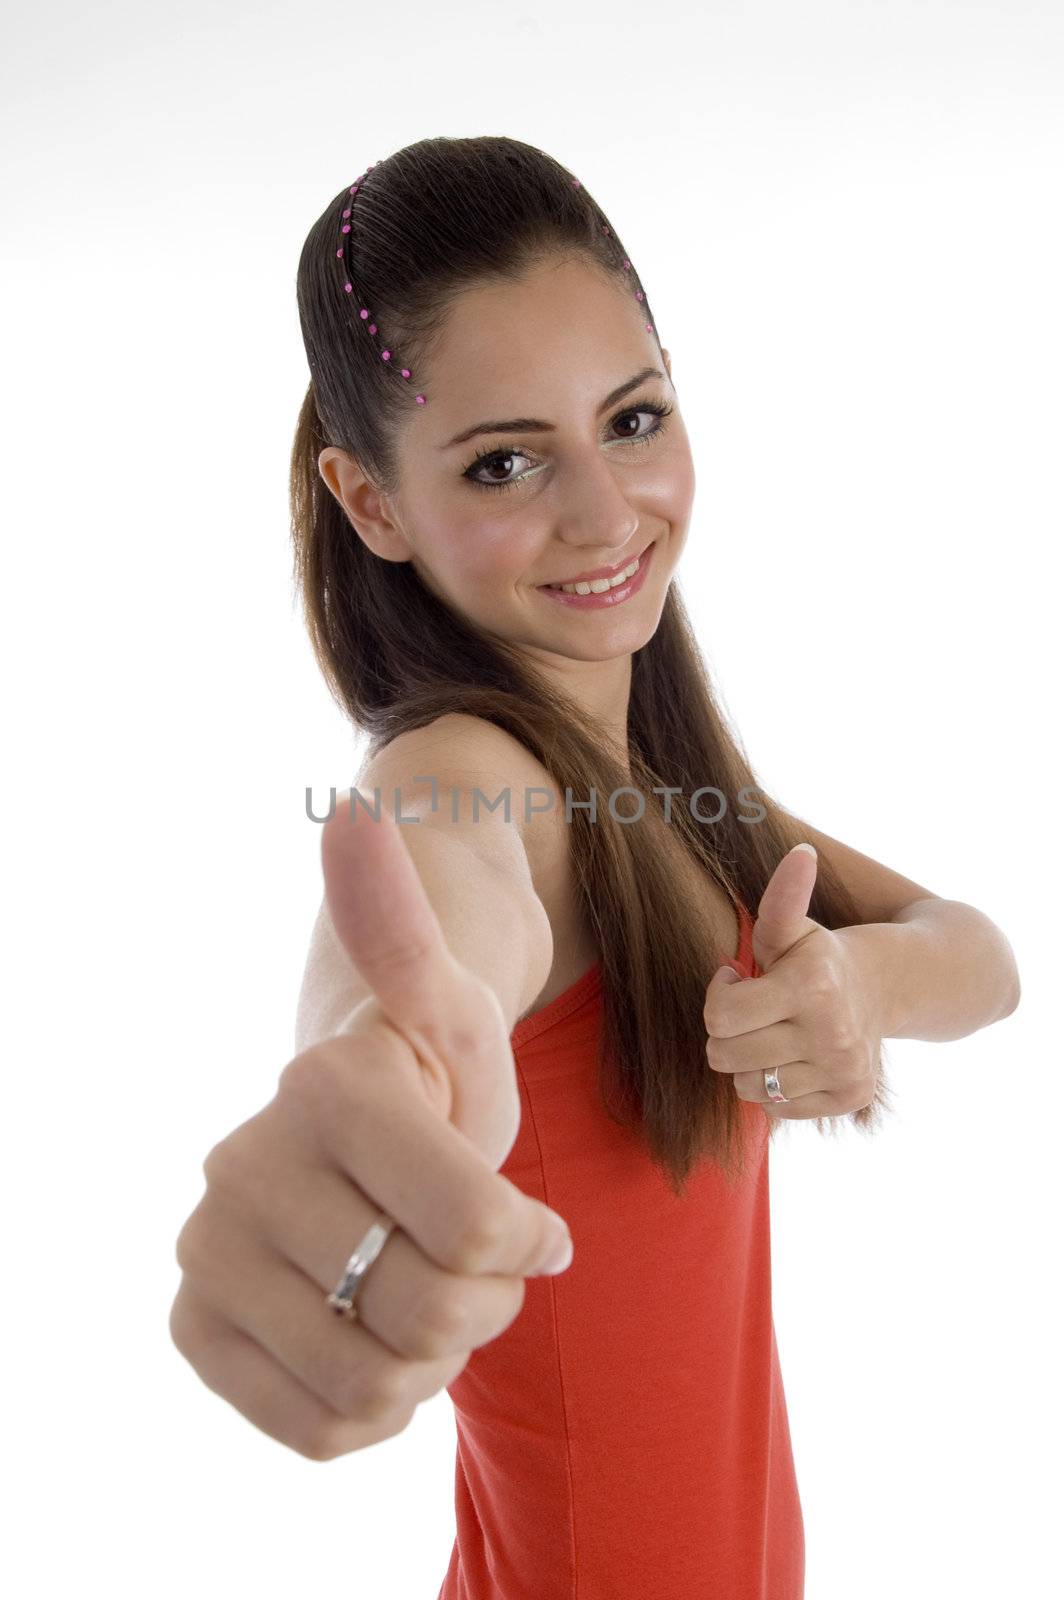 smiling girl with beautiful hairstyle showing thumb gesture against white background